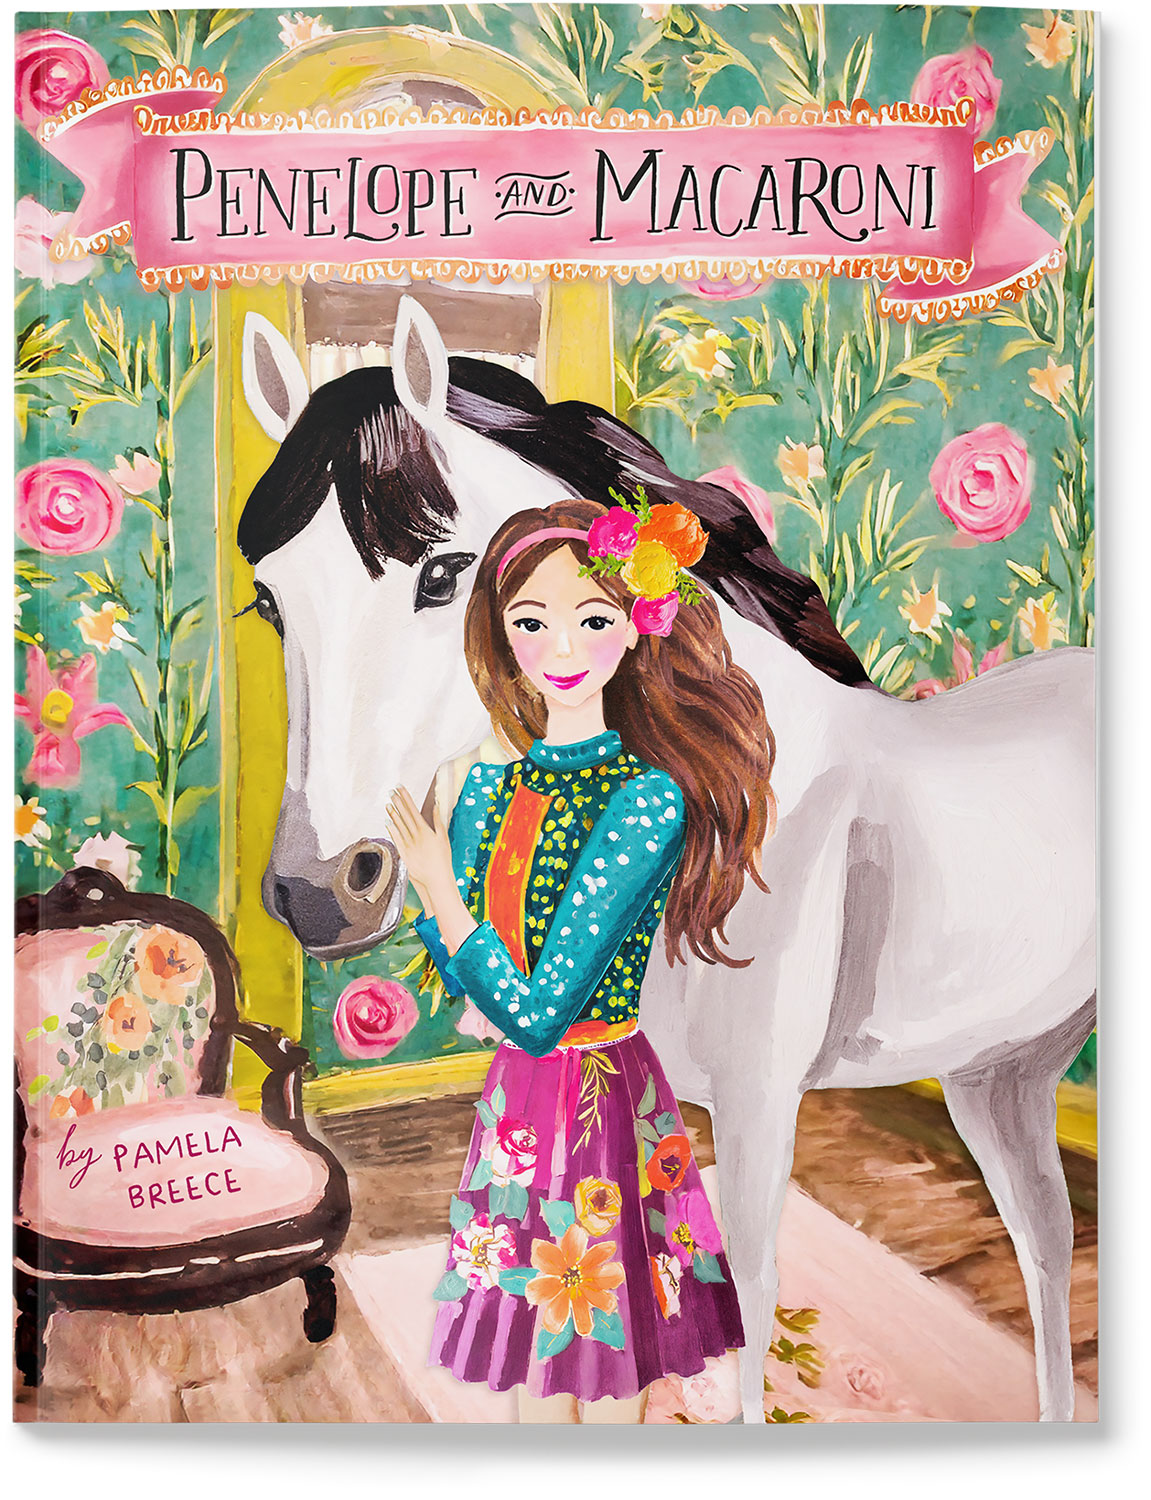 Fall in Love with "Penelope and Macaroni"